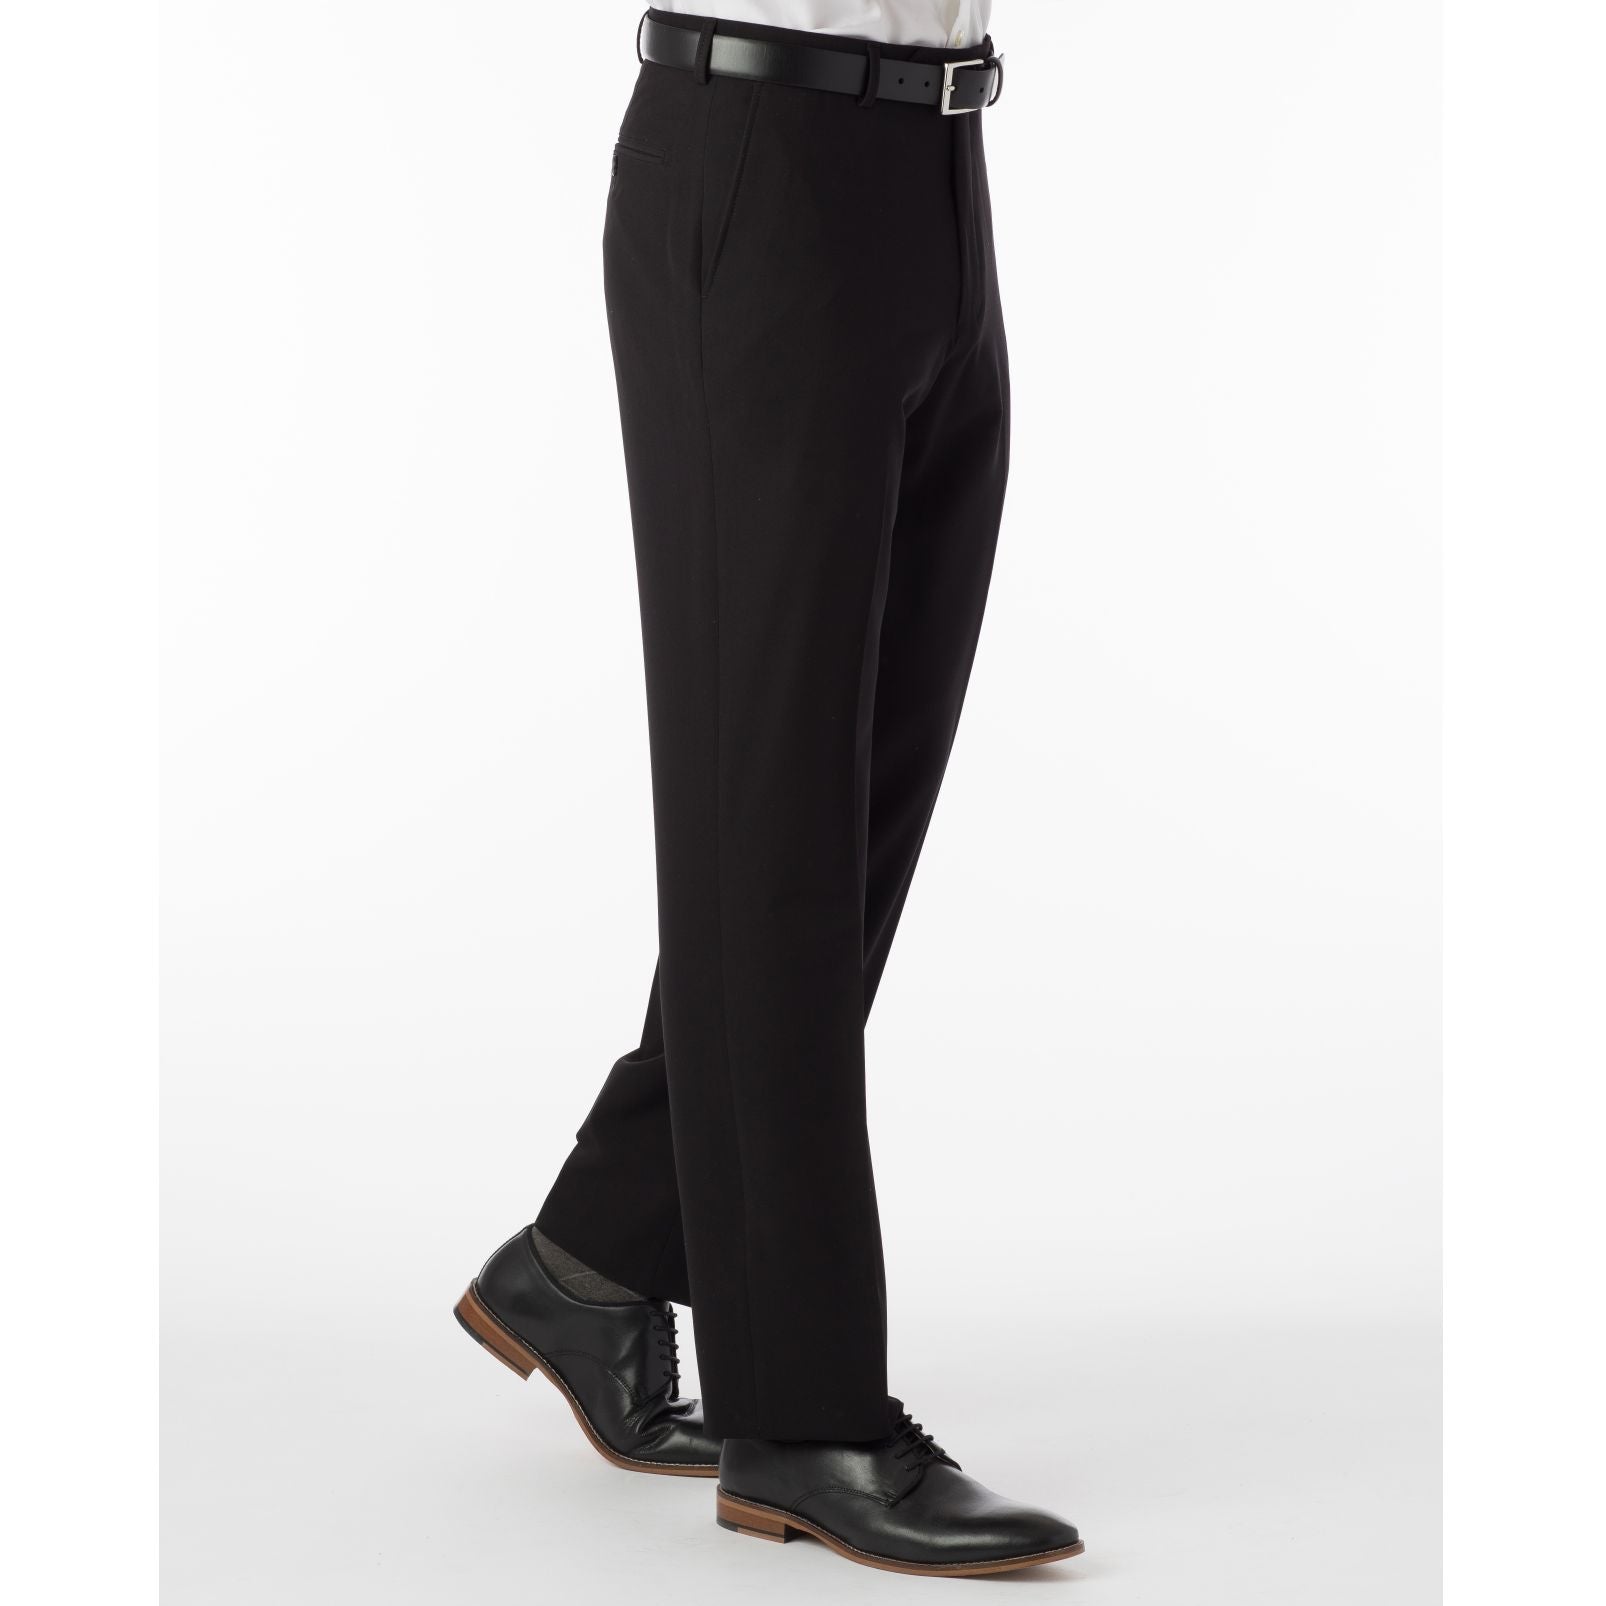 Comfort-EZE Commuter Bi-Stretch Gabardine Trouser in Black, Size 36 (Dunhill Traditional Fit) by Ballin